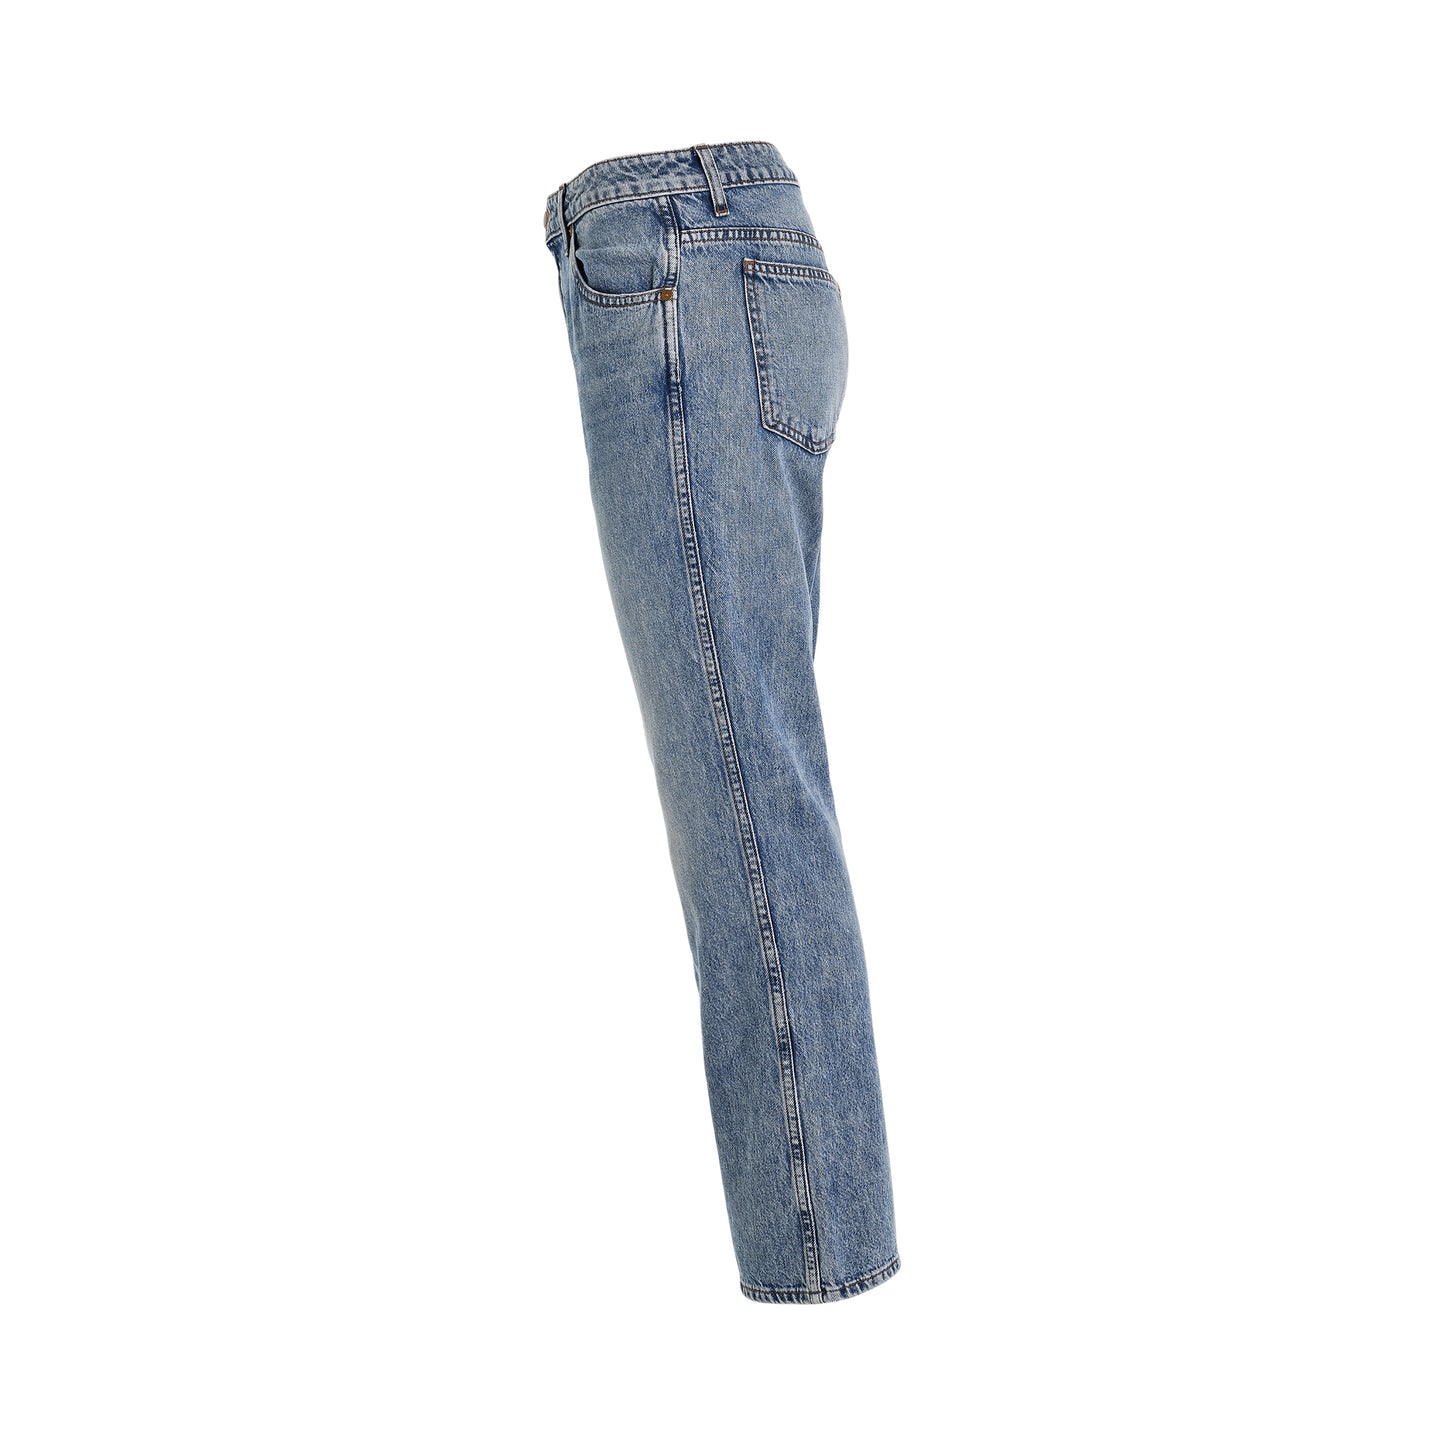 Vivian Bootcut Flare Jeans in Bryc